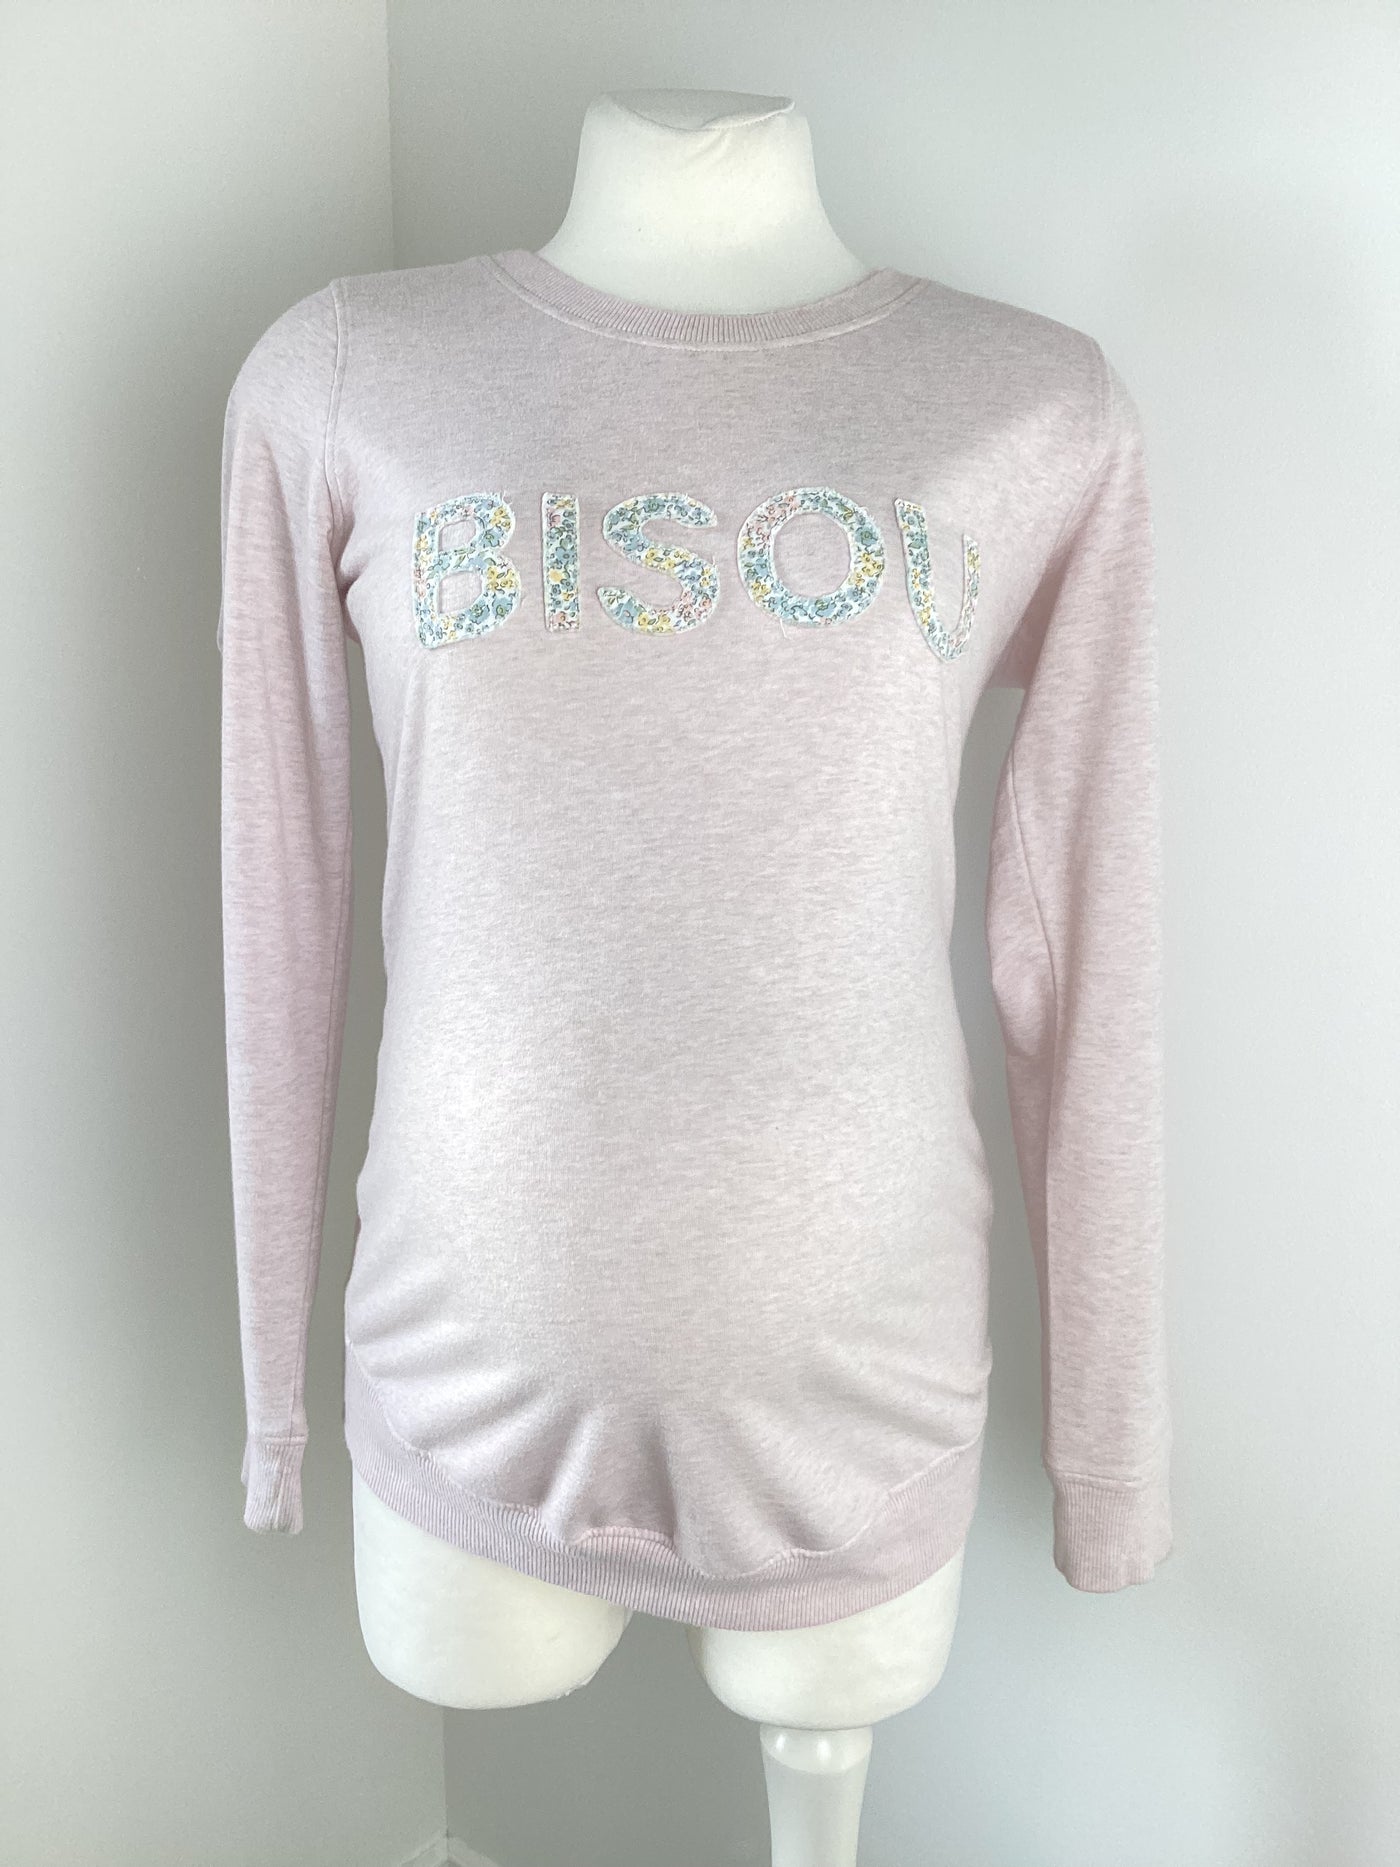 H&M Mama light pink 'Bisou' jumper - Size S (Approx UK 8/10)